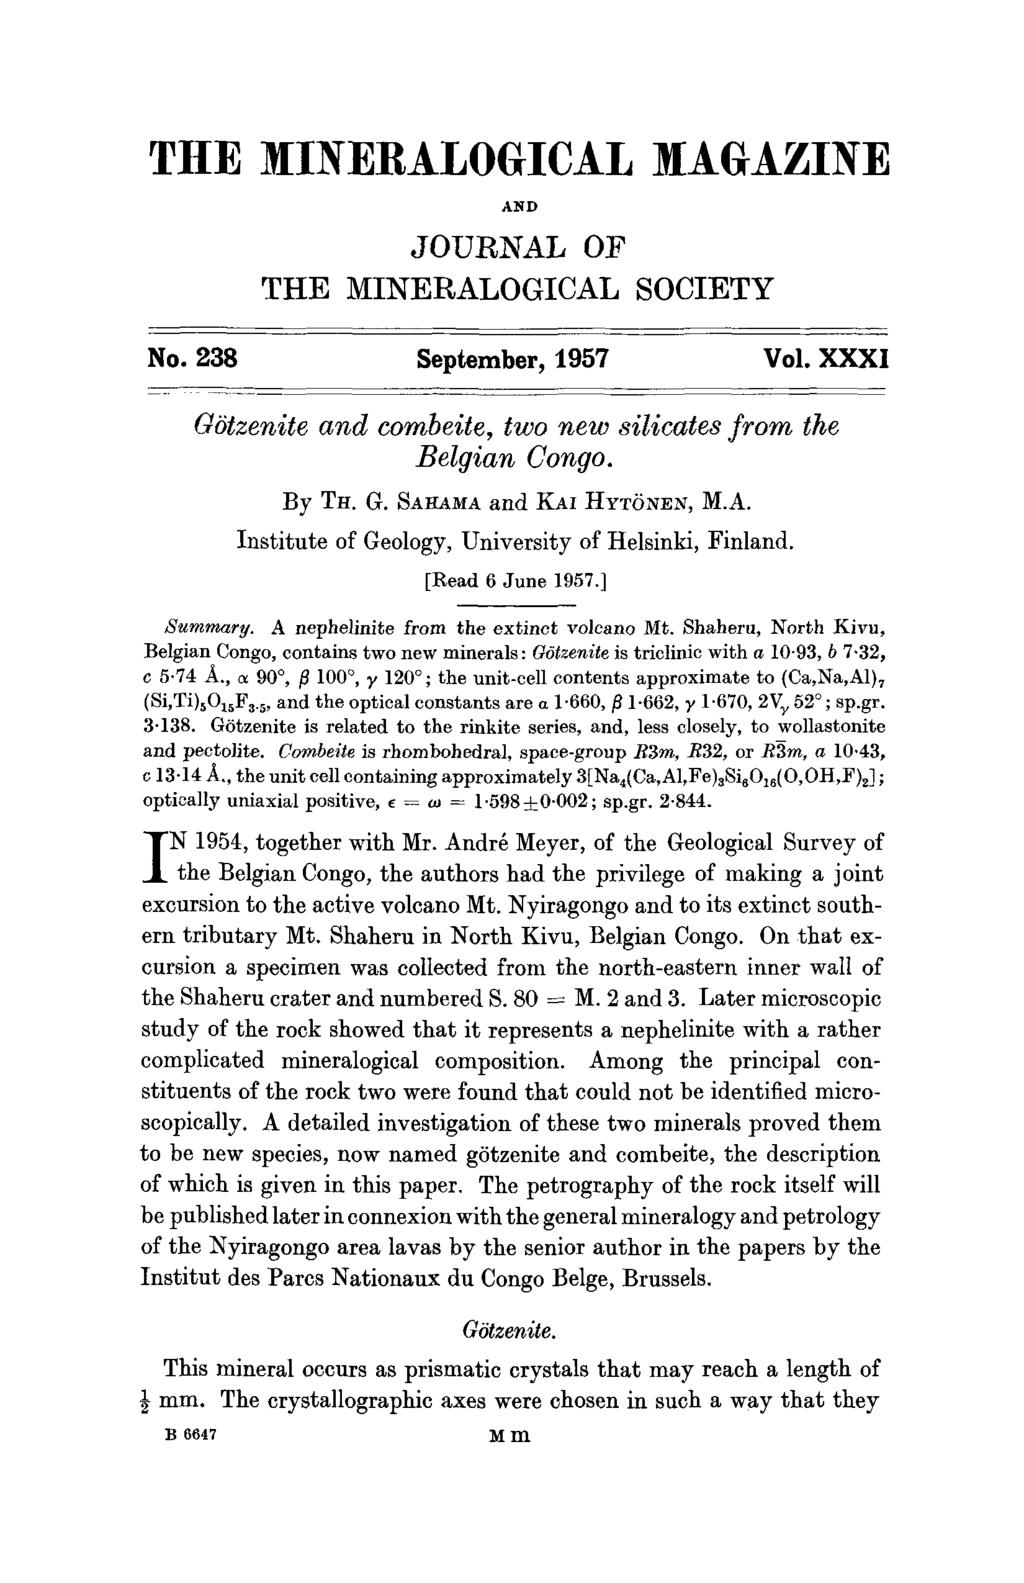 THE MINERALOGICAL MAGAZINE AND JOURNAL OF THE MINERALOGICAL SOCIETY No. 238 September, 1957 Vol. XXXI GStzenite and combeite, two new silicates from the Belgian Congo. By TR. G. SA~AMA and KAI HYT(gNEN, M.